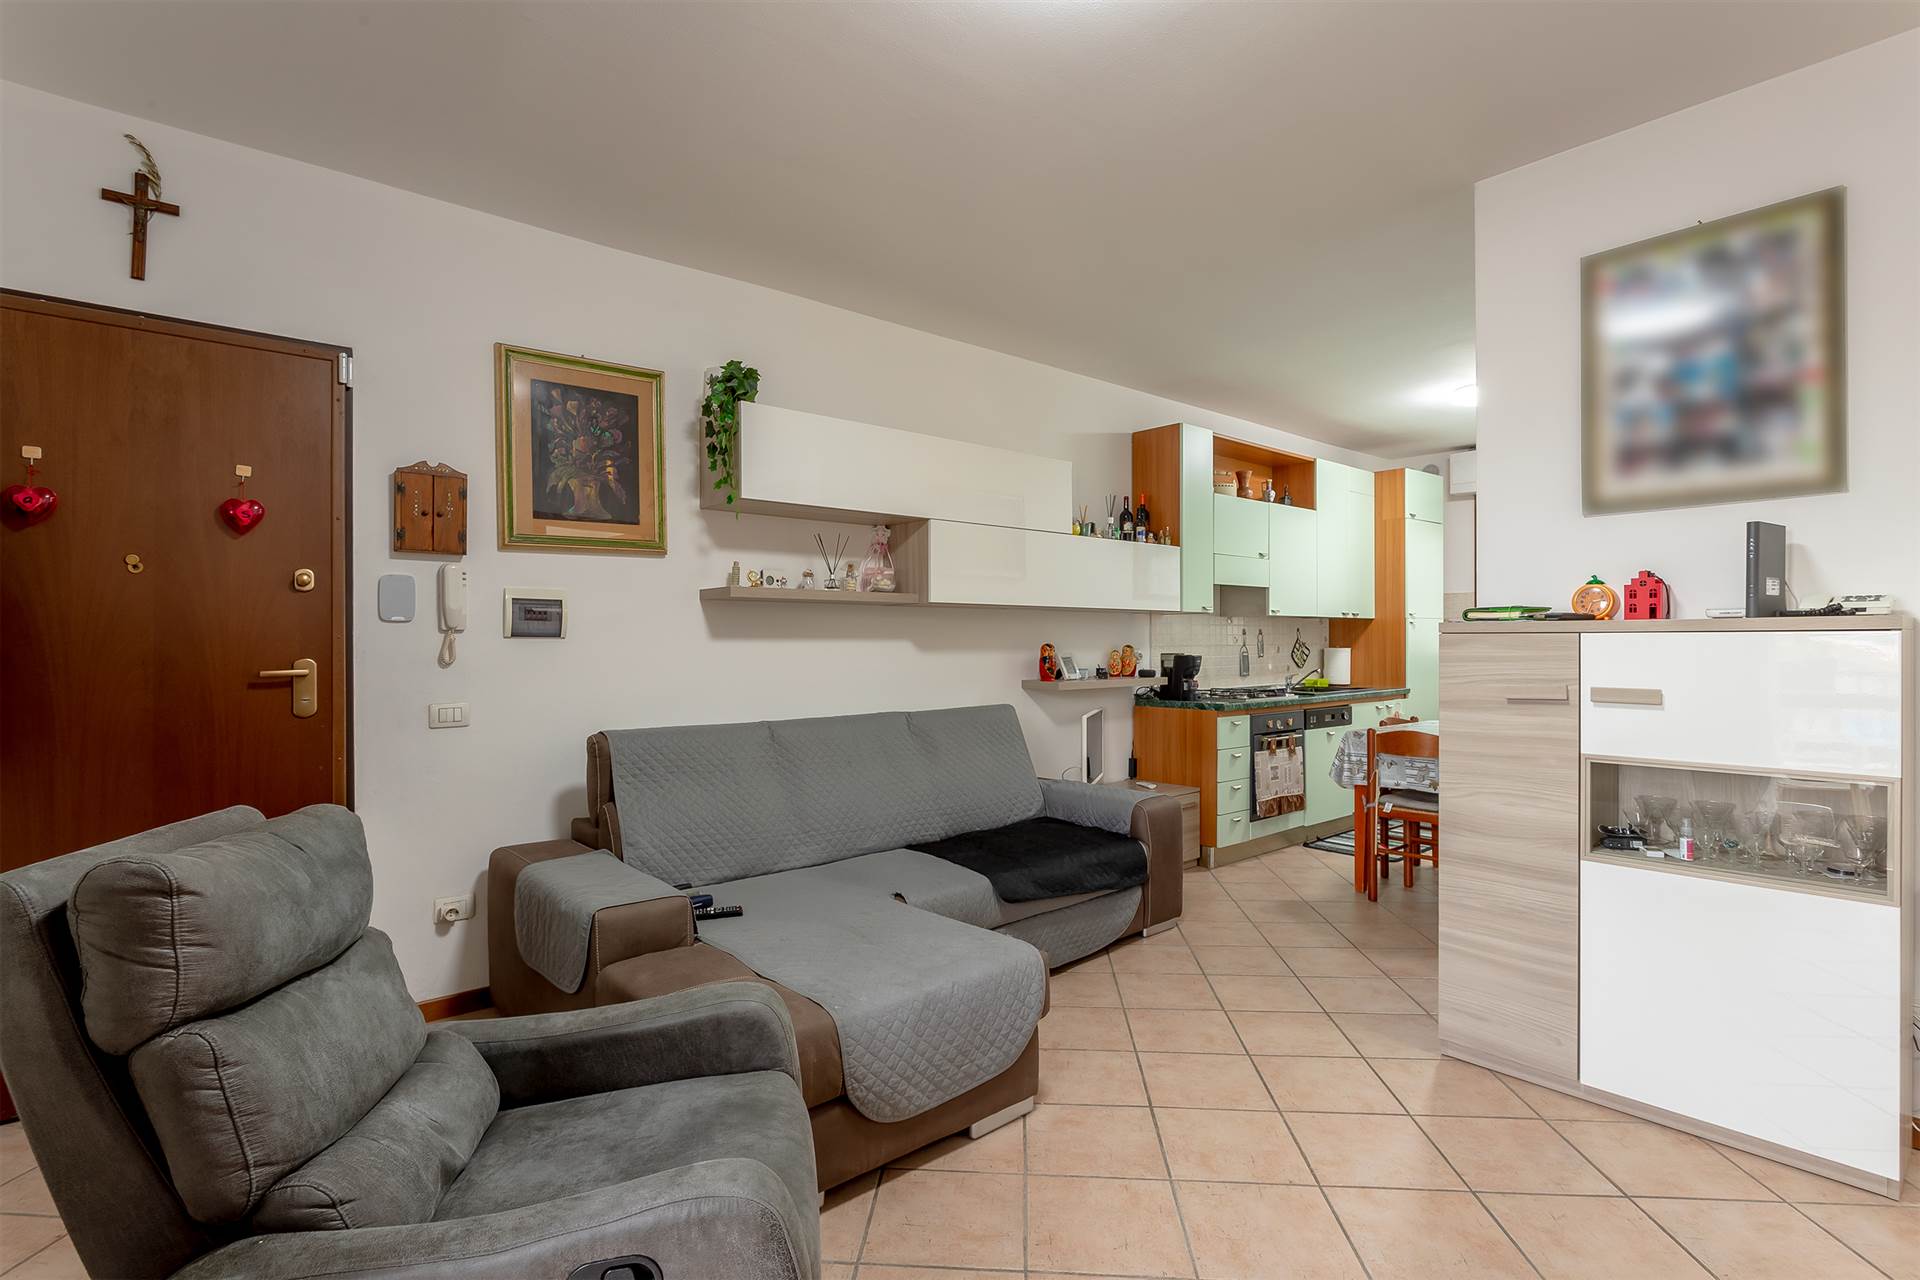 SAN MICHELE, AGLIANA, Apartment for sale of 55 Sq. mt., Excellent Condition, Heating Individual heating system, Energetic class: G, placed at 2° on 2,